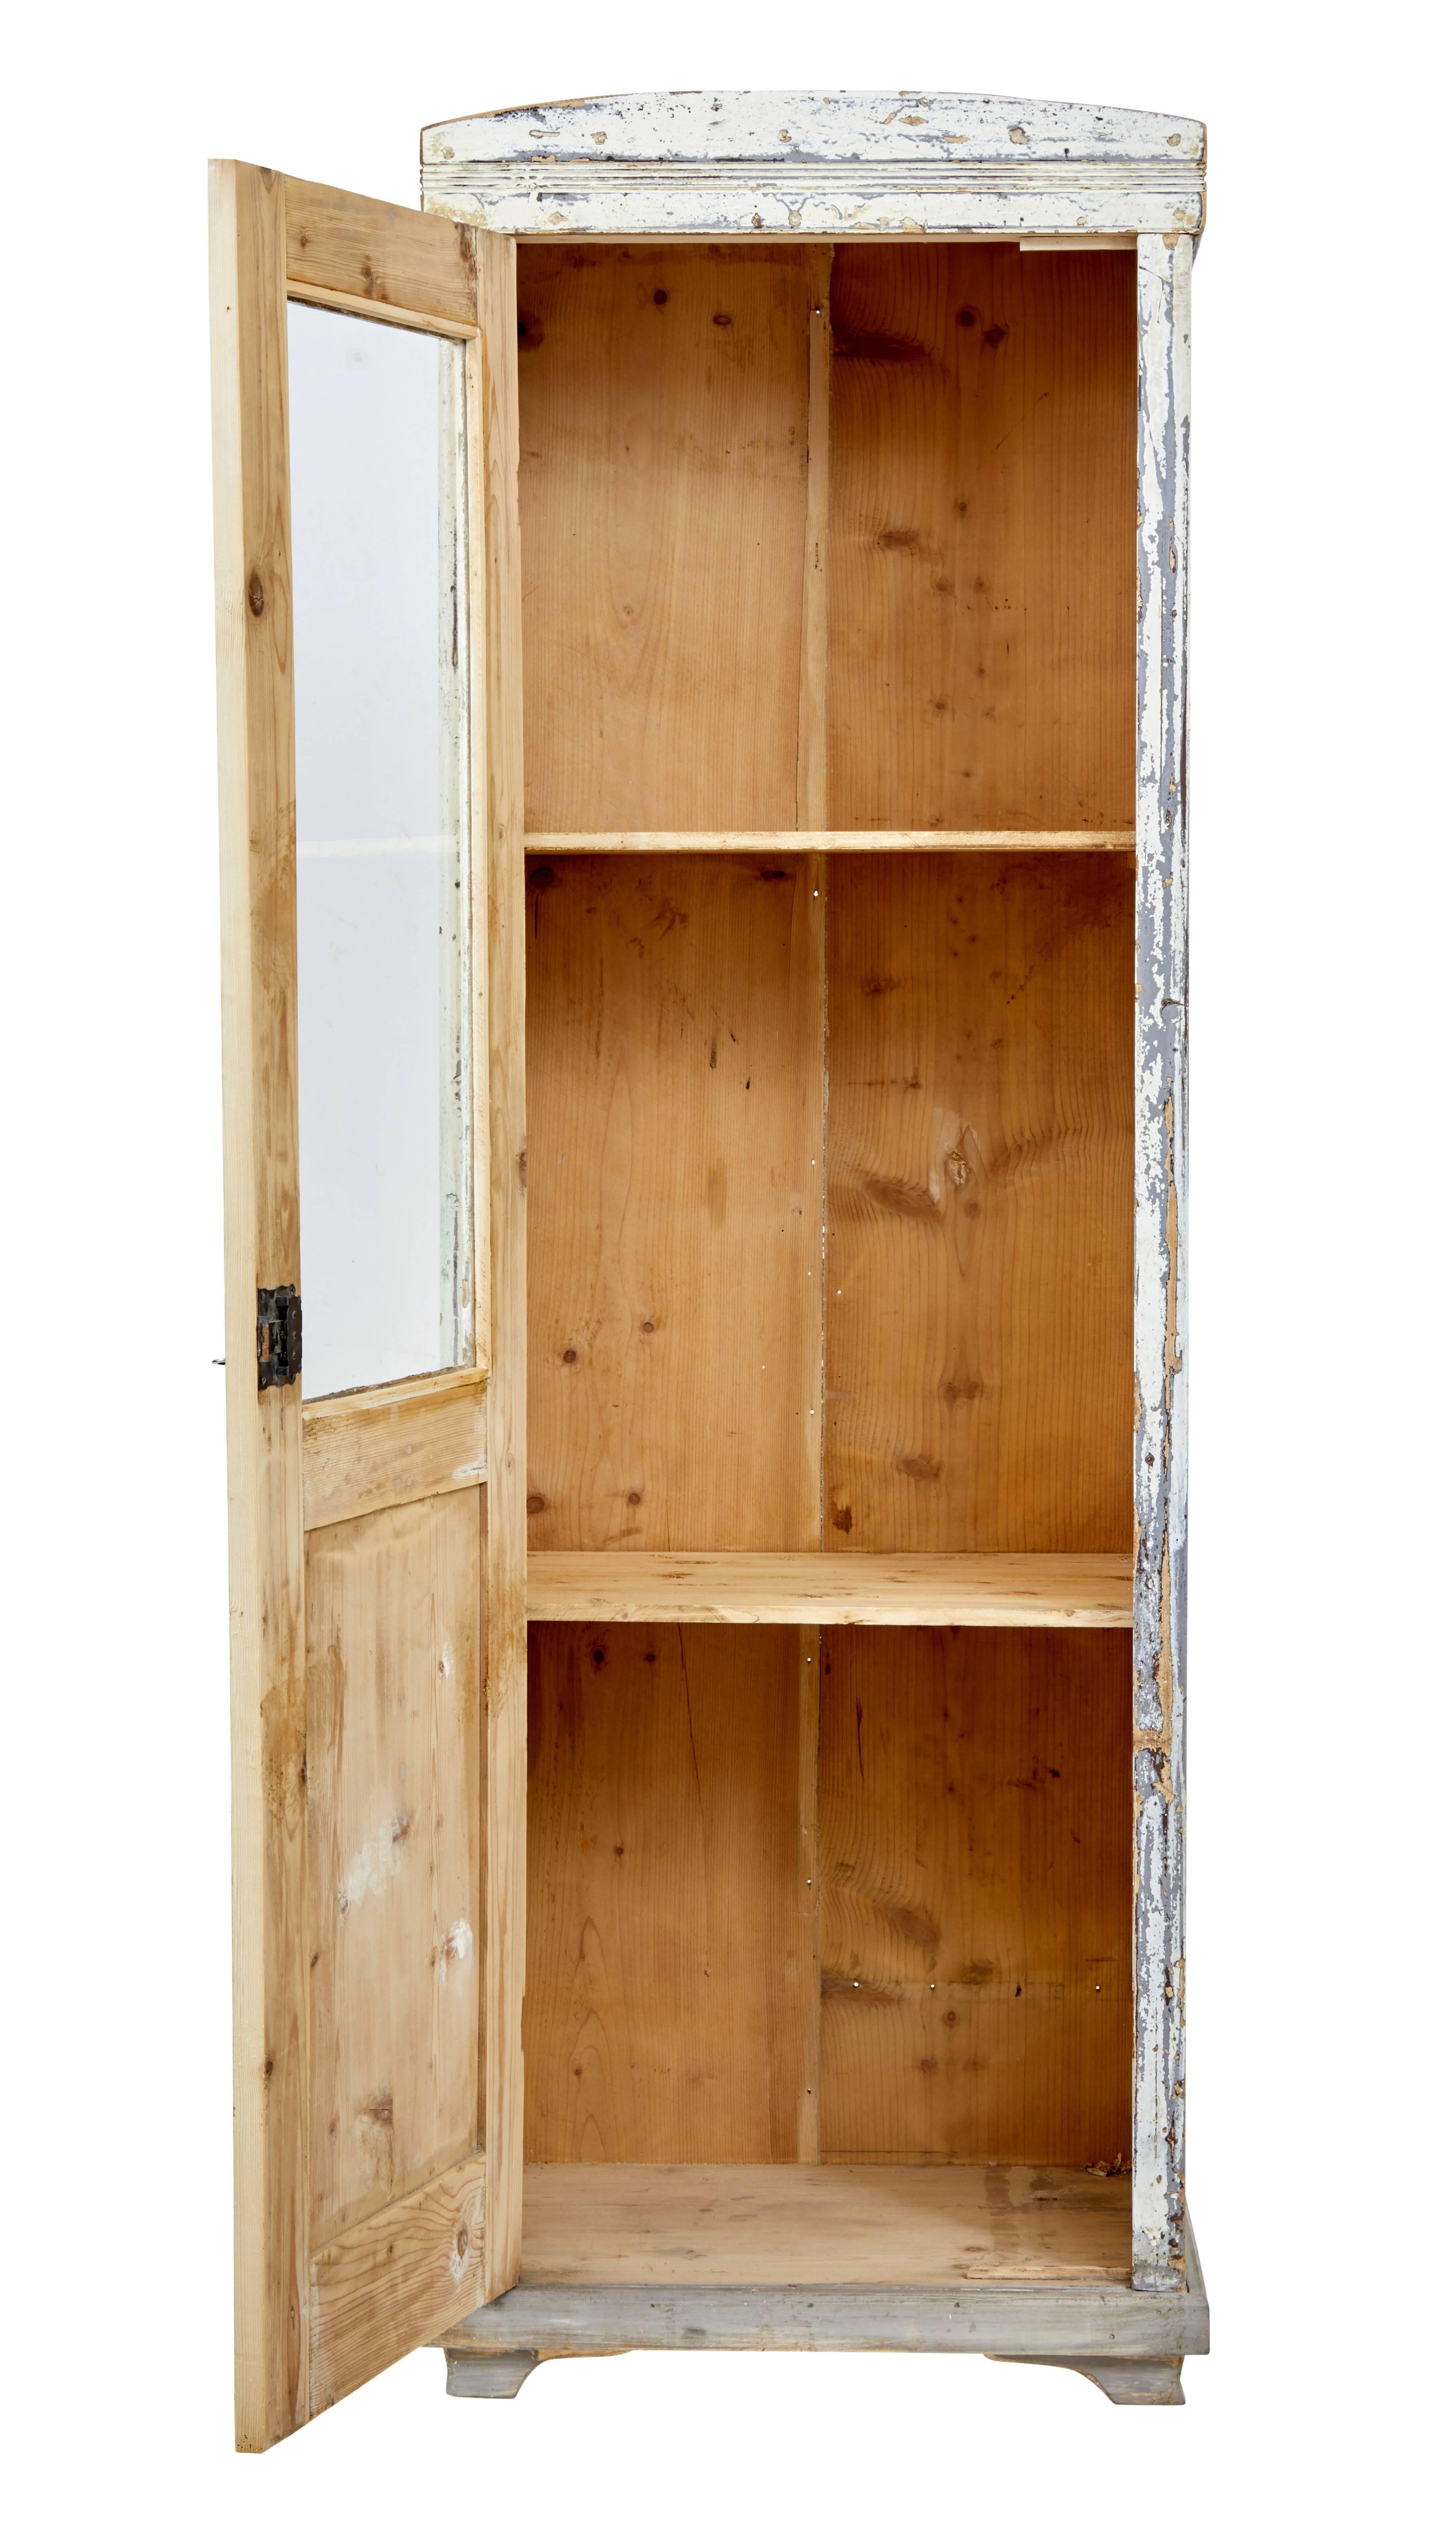 Rustic Swedish pine cabinet, circa 1890.

Presented in original scraped back paint.

Single half glazed door opens to an interior of two shelves. Ideal for a linen or kitchen cupboard.

Replaced feet and moulding.

Obvious paint losses and